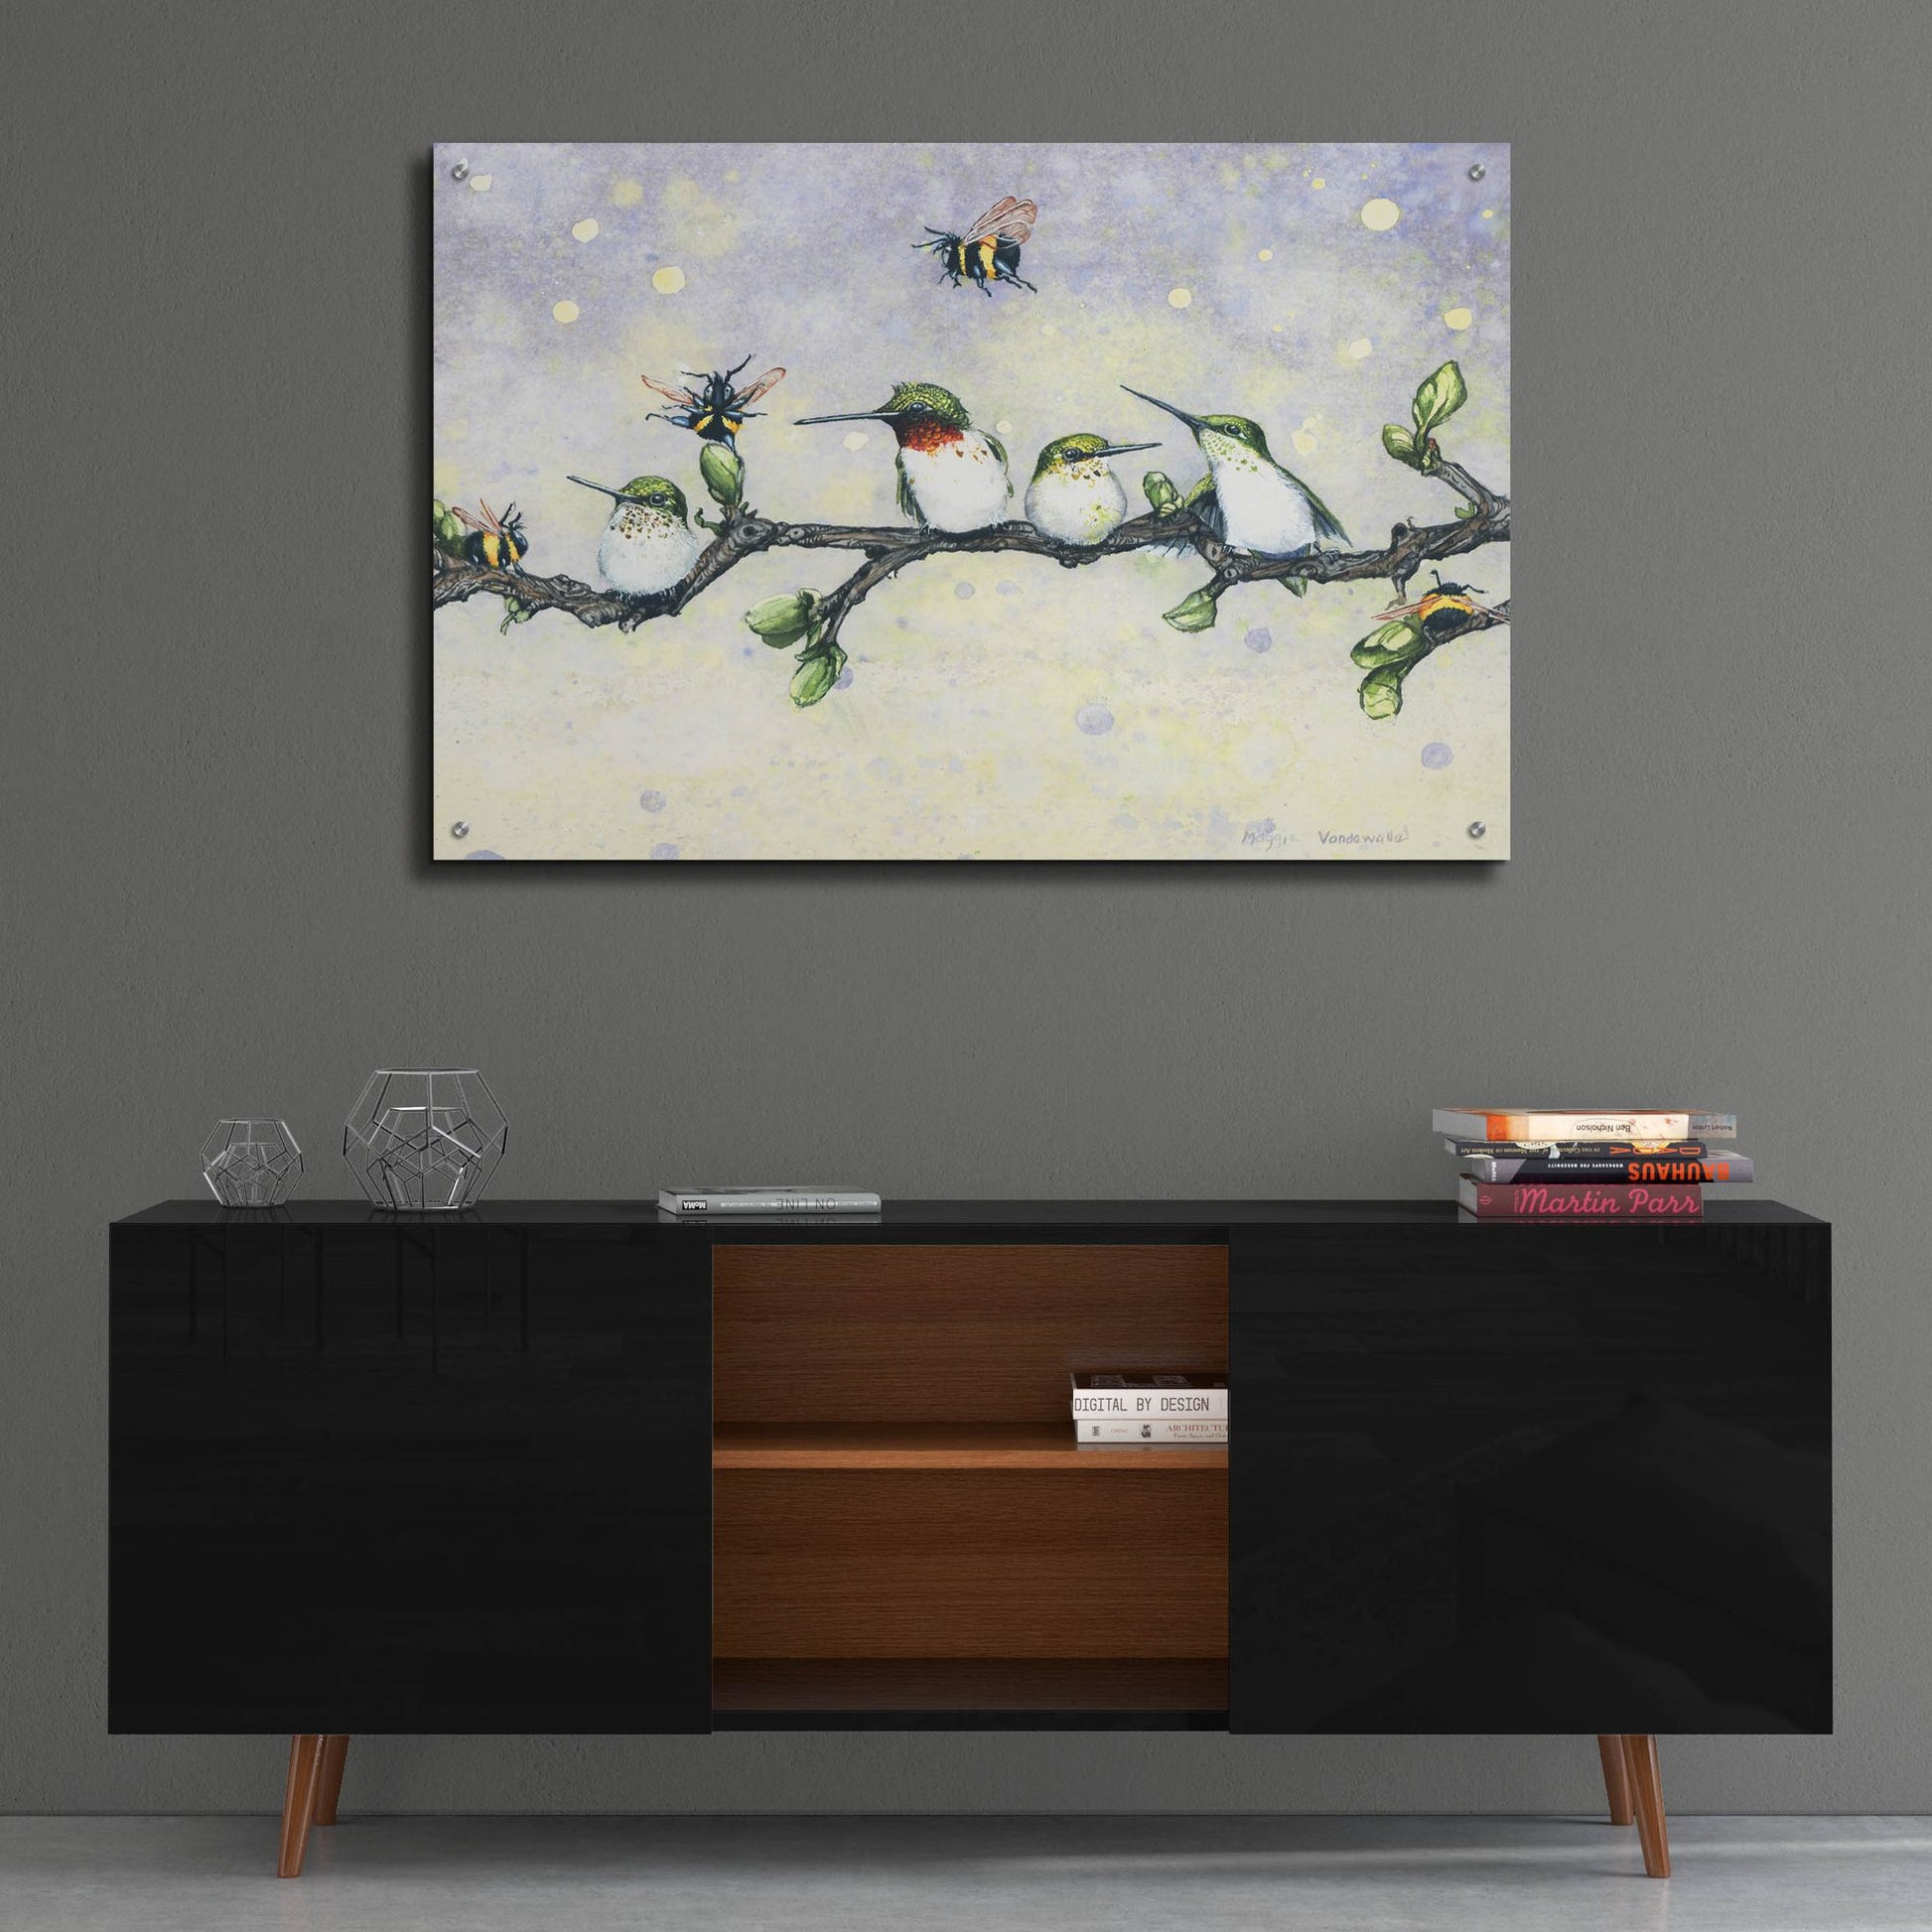 Epic Art 'The Birds and the Bees' by Maggie Vandewalle, Acrylic Glass Wall Art,36x24